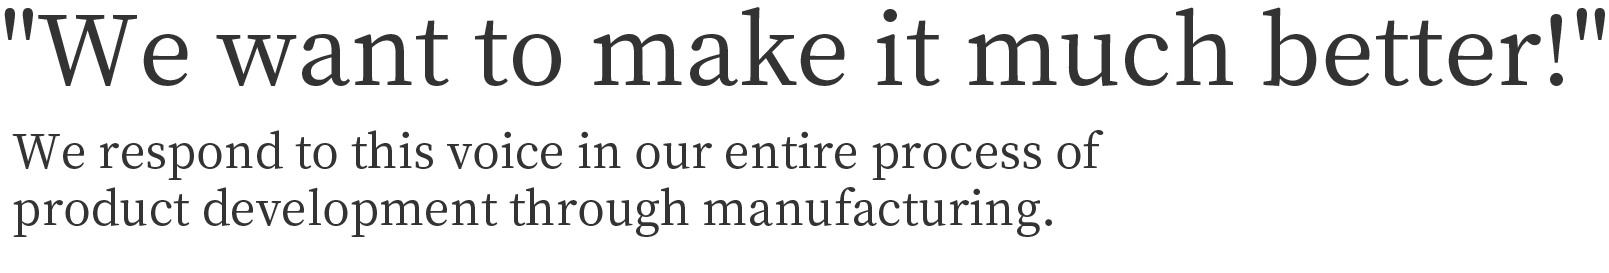 We want to make it much better!
We respond to this voice in our entire process of product development through manufacturing